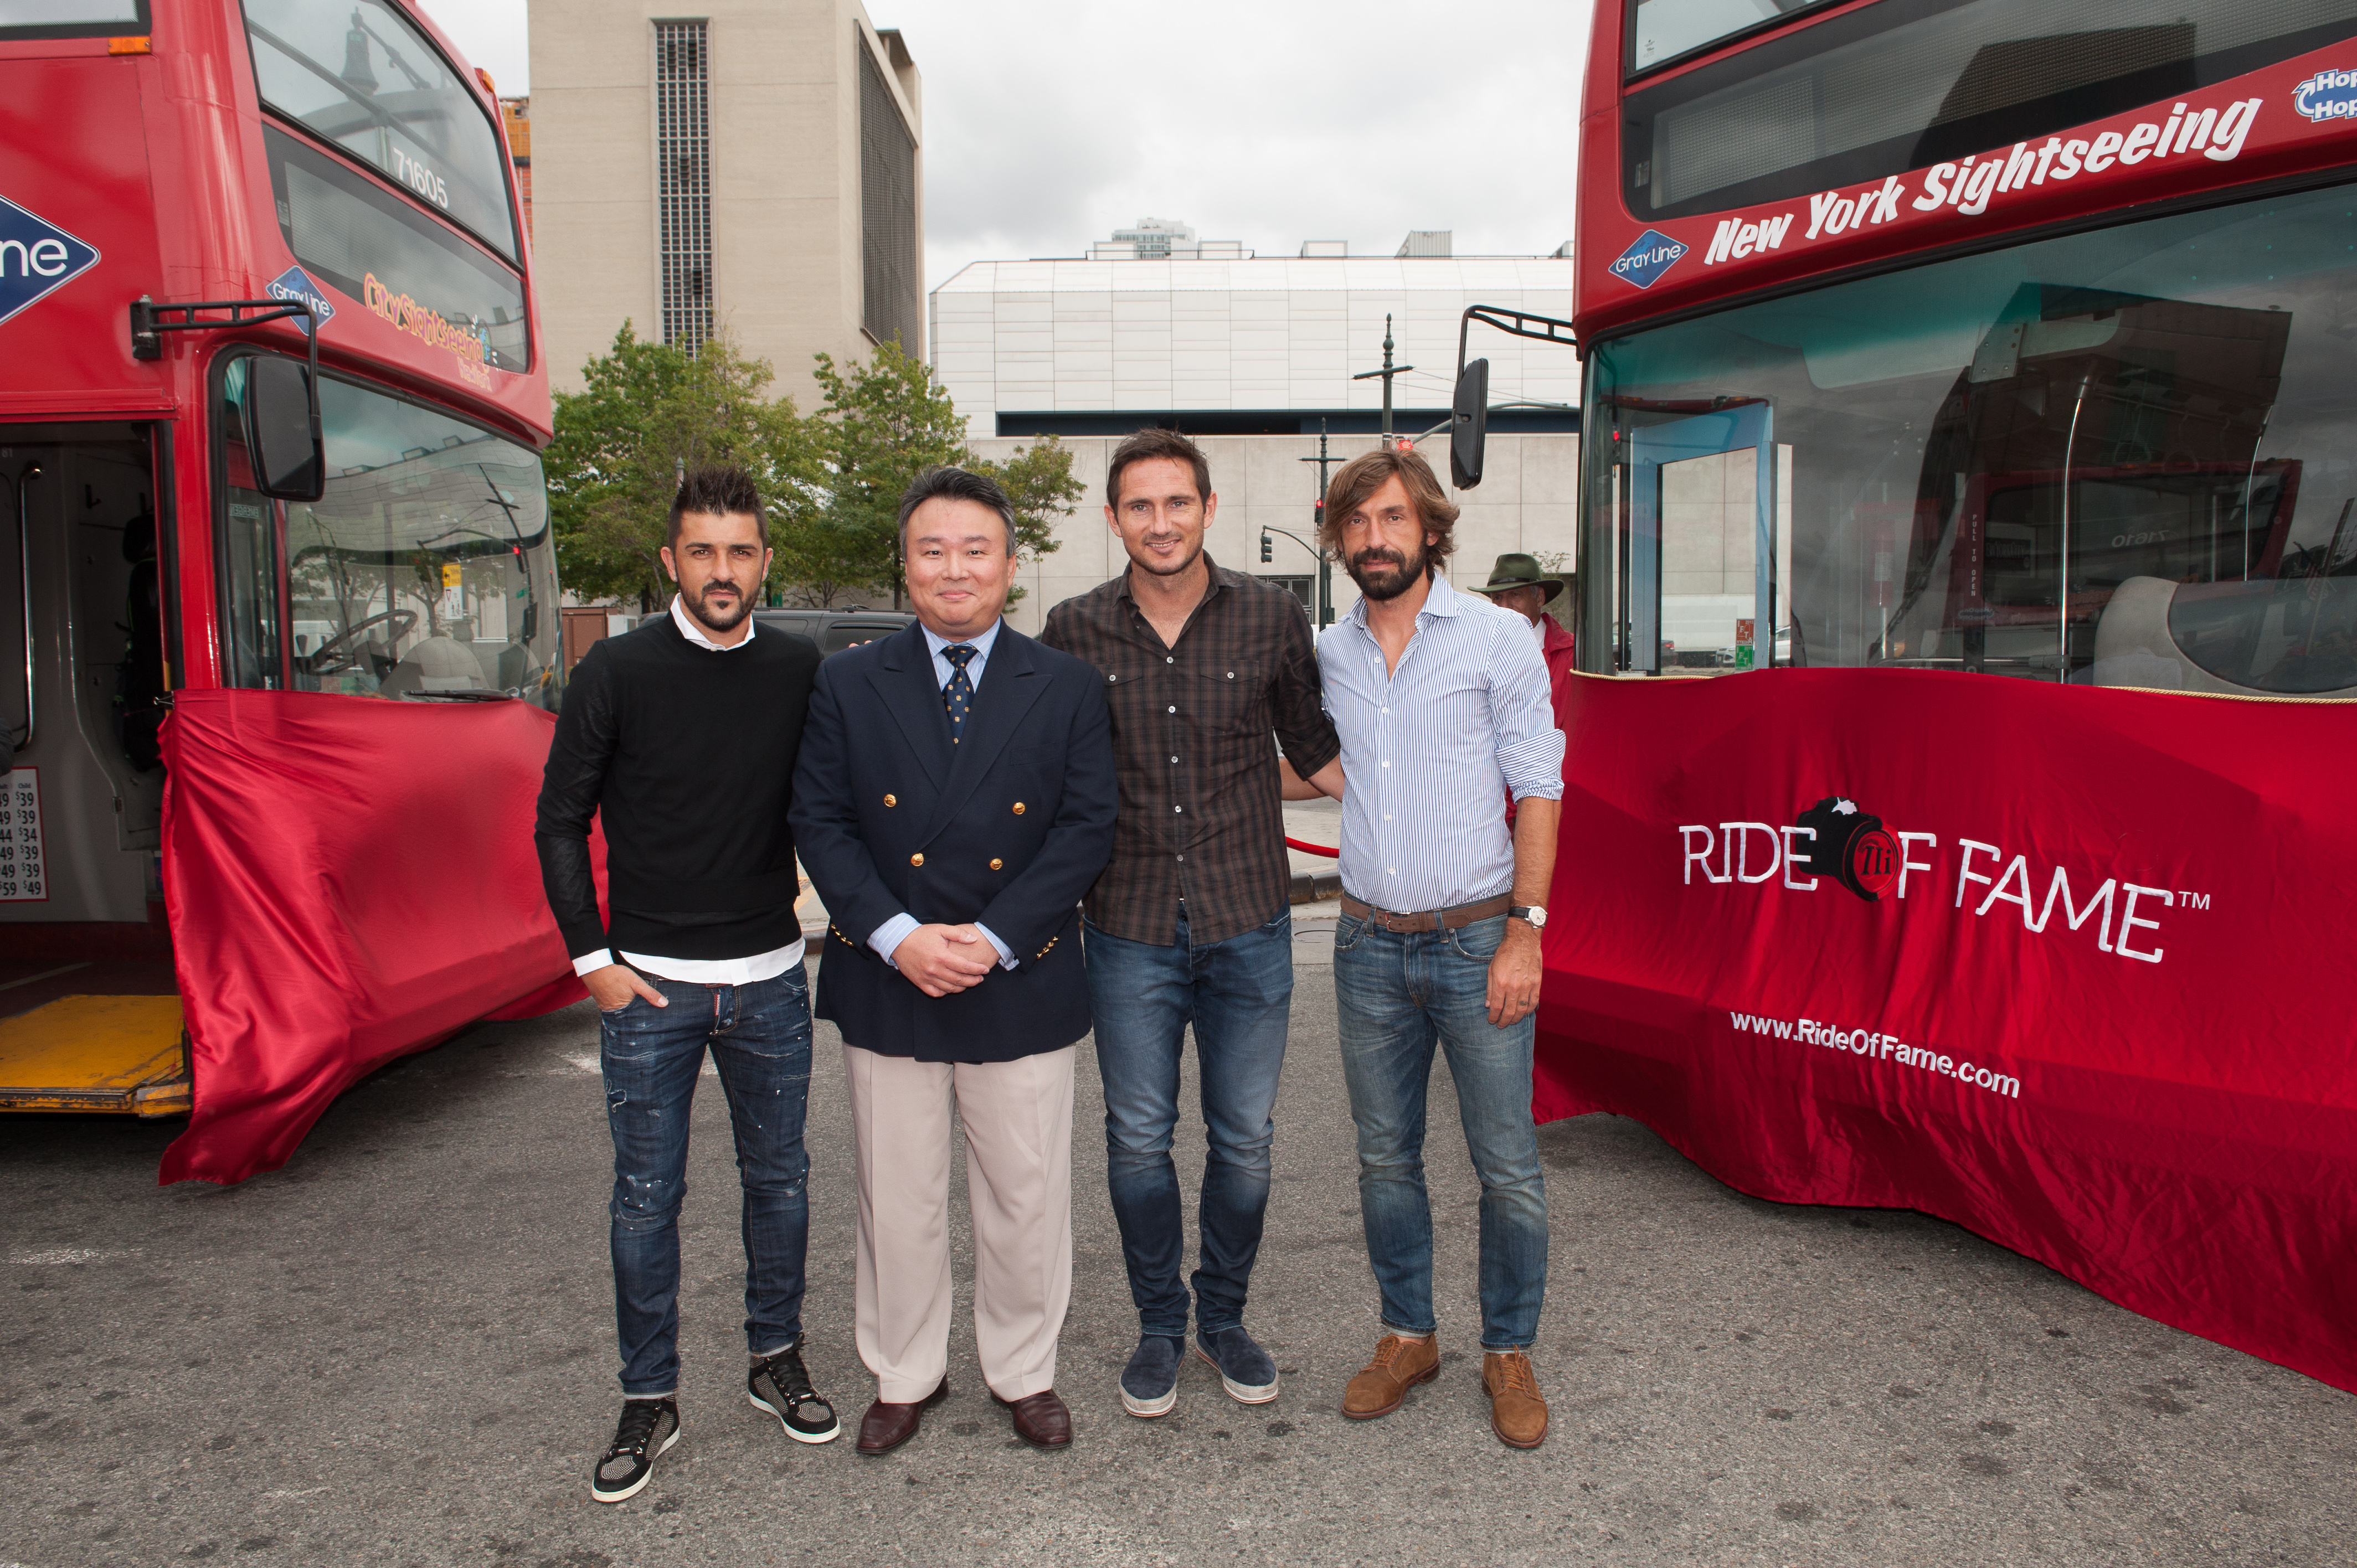 David W. Chien with Ride of Fame Official Fifth Anniversary Honorees David Villa, Frank Lampard and Andrea Pirlo (September 22nd, 2015).